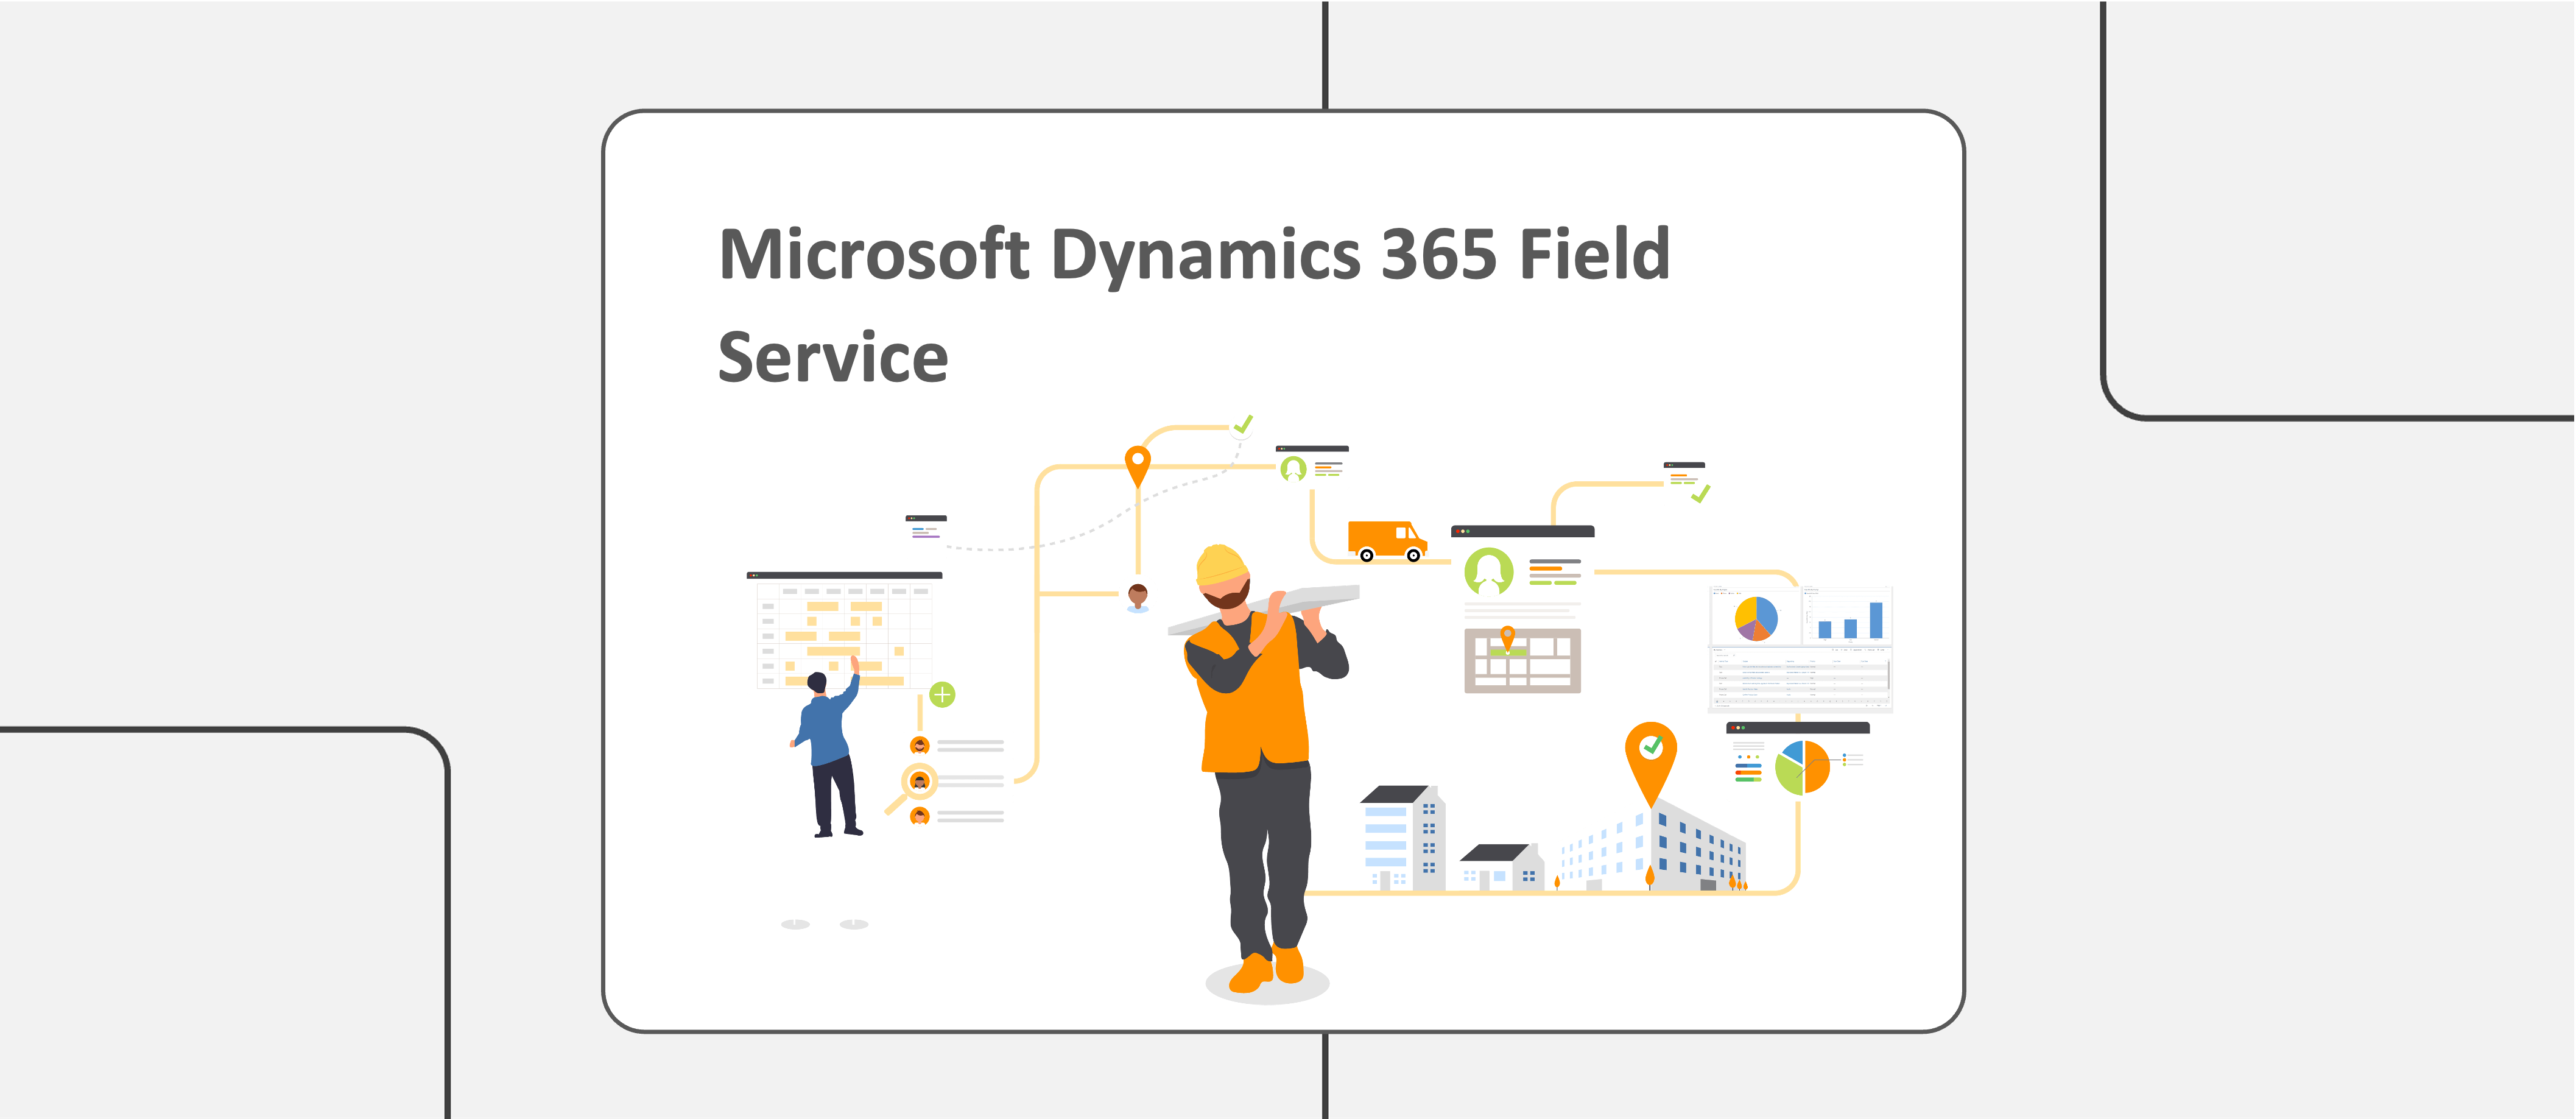 Why is Dynamics 365 Field Service best for organizations